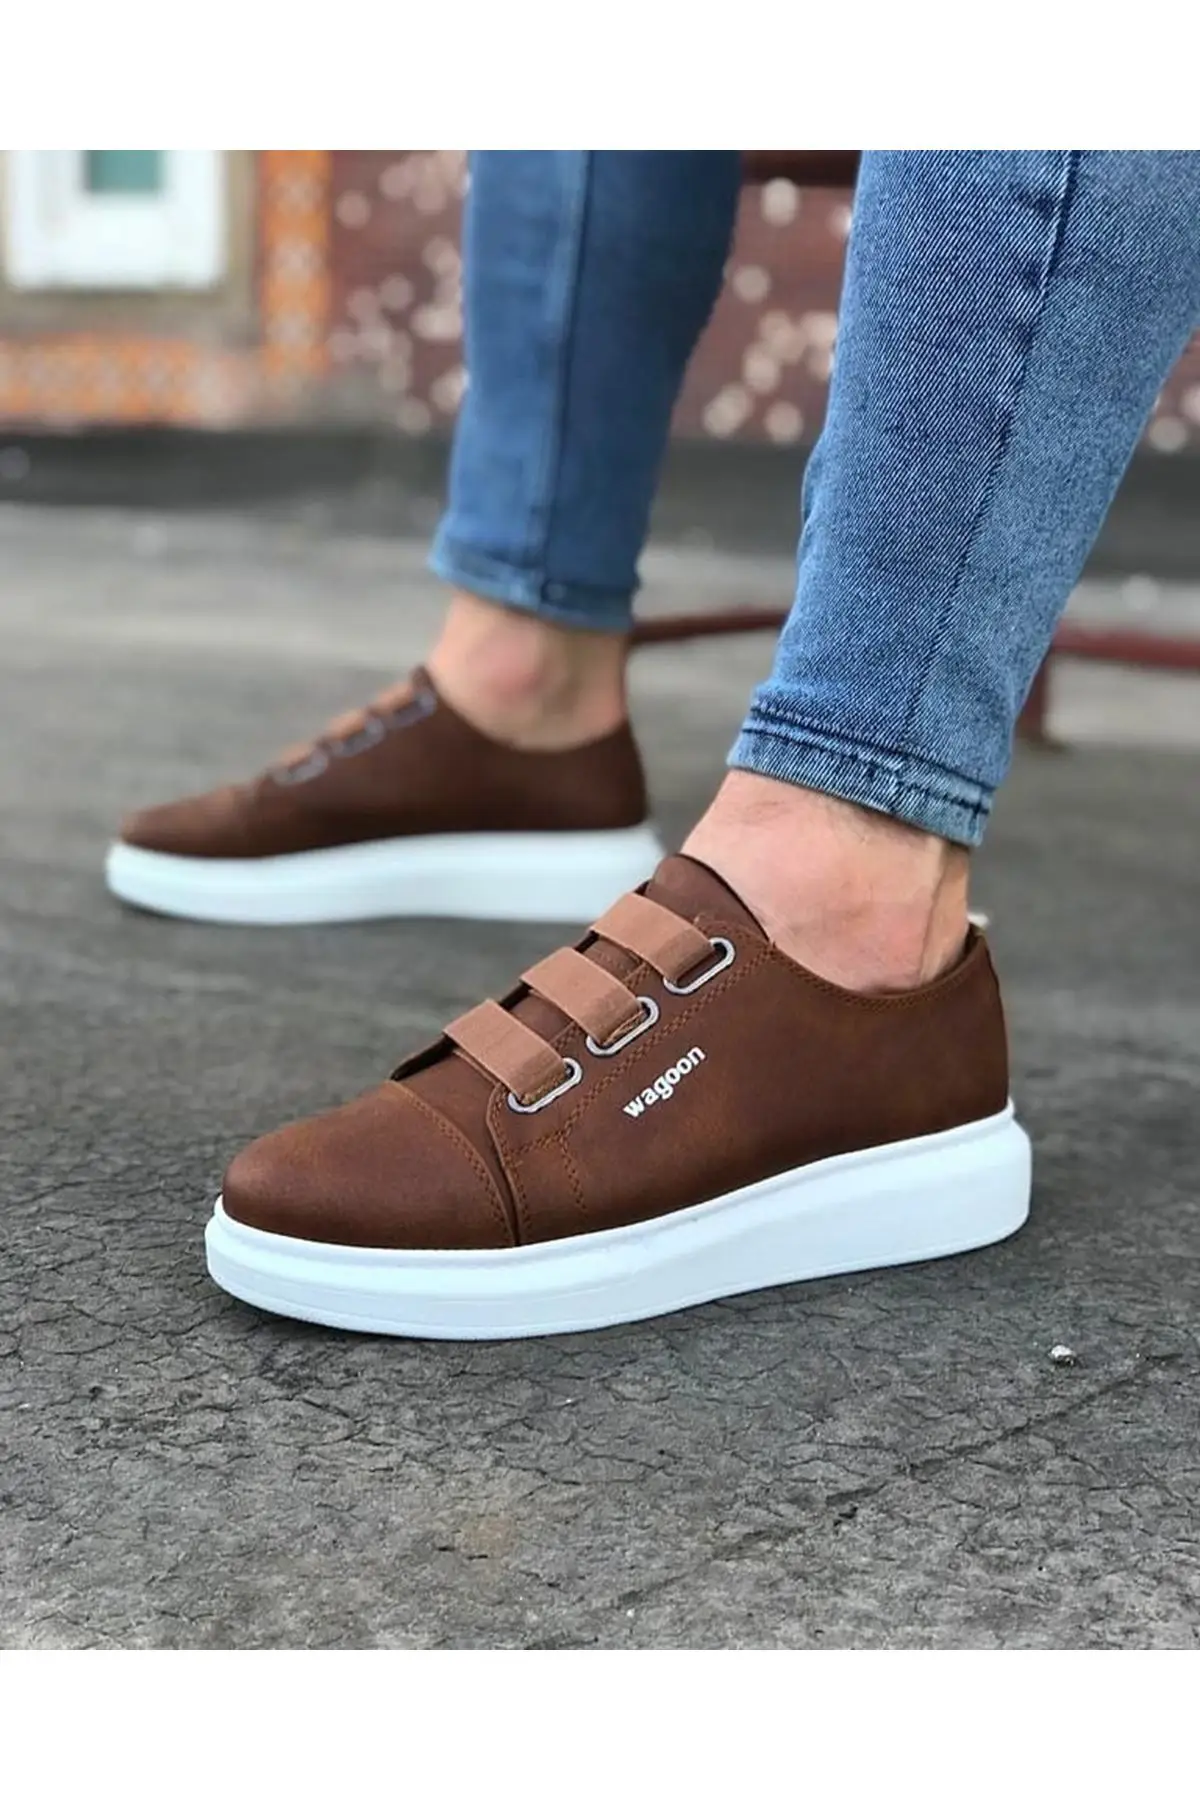 

Wagon Men's Sneakers Sport Shoes Tan White Lace Up Closure Faux Leather Spring and Autumn Seasons Comfortable Slip On In 2022 Fashion Wedding Orthopedic Suit Unisex Light Odorless Breathable WG026